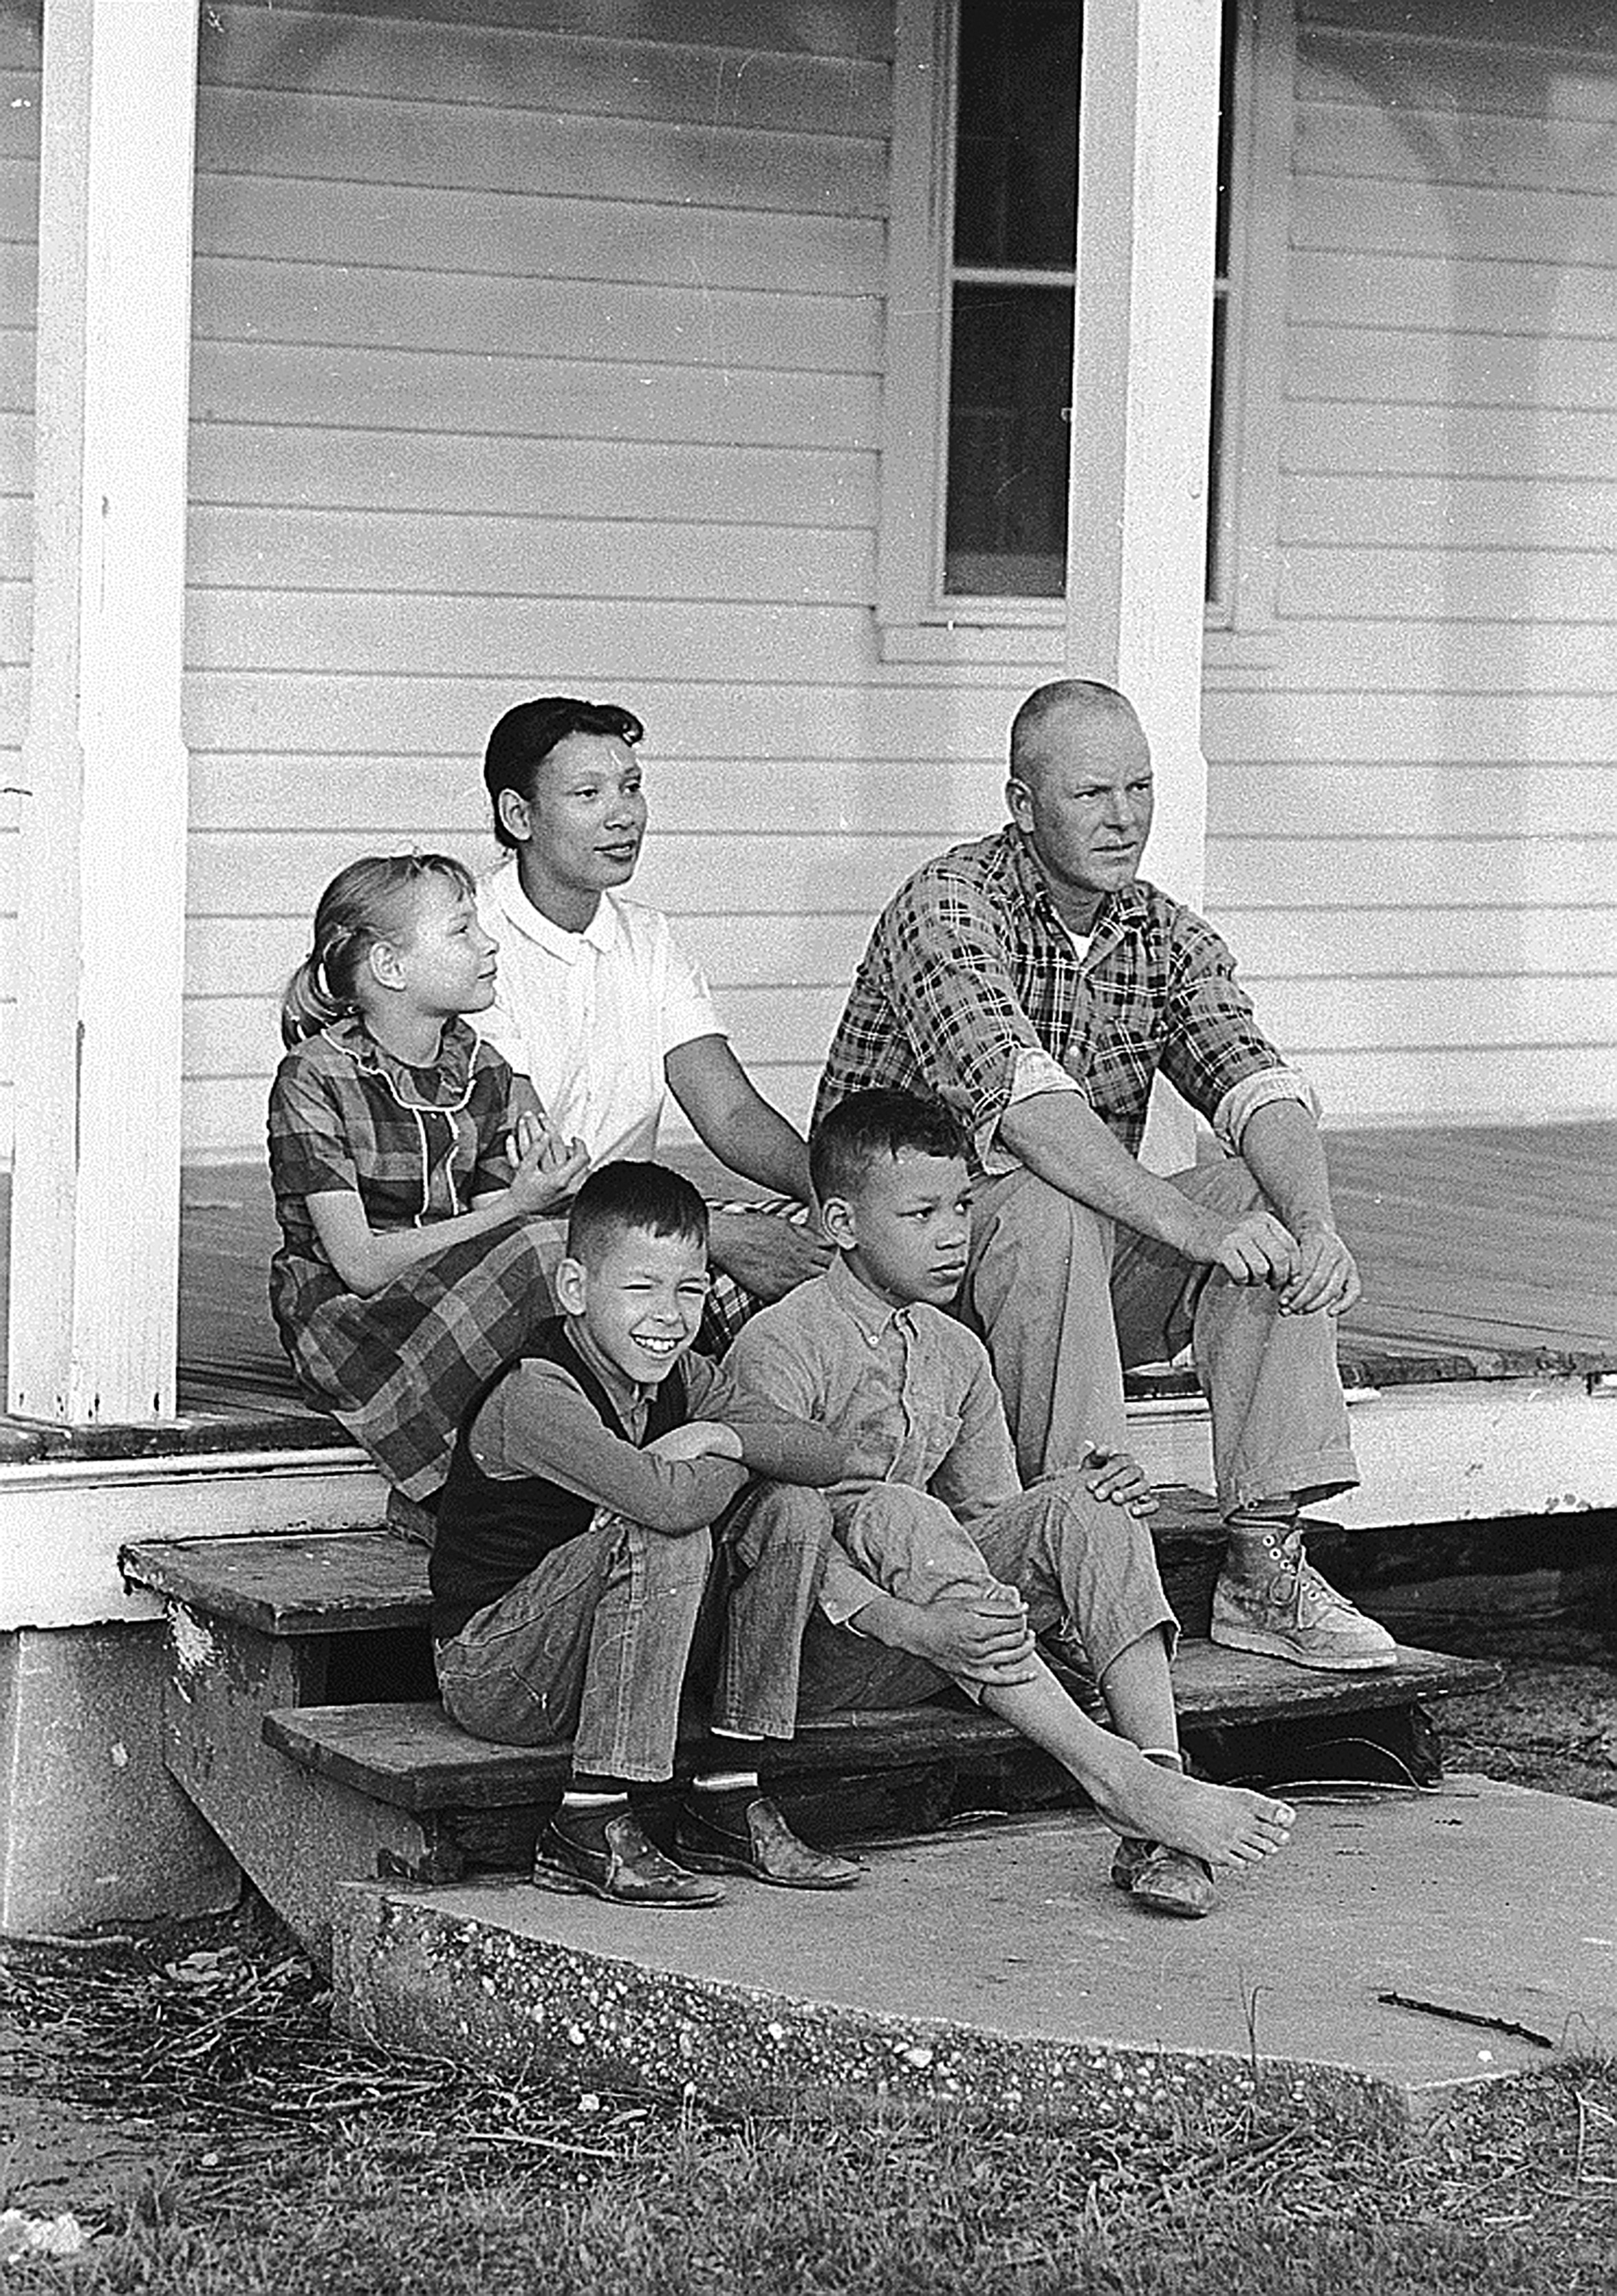 Richard and Mildred Loving are shown at their Central Point, Virginia home with their children in 1967. Prompted by the 50th anniversary of Loving v. Virginia, which struck down laws banning interracial marriages, The New York Times featured the profiles and wedding photos of six mixed-race couples in their Race/Related newsletter